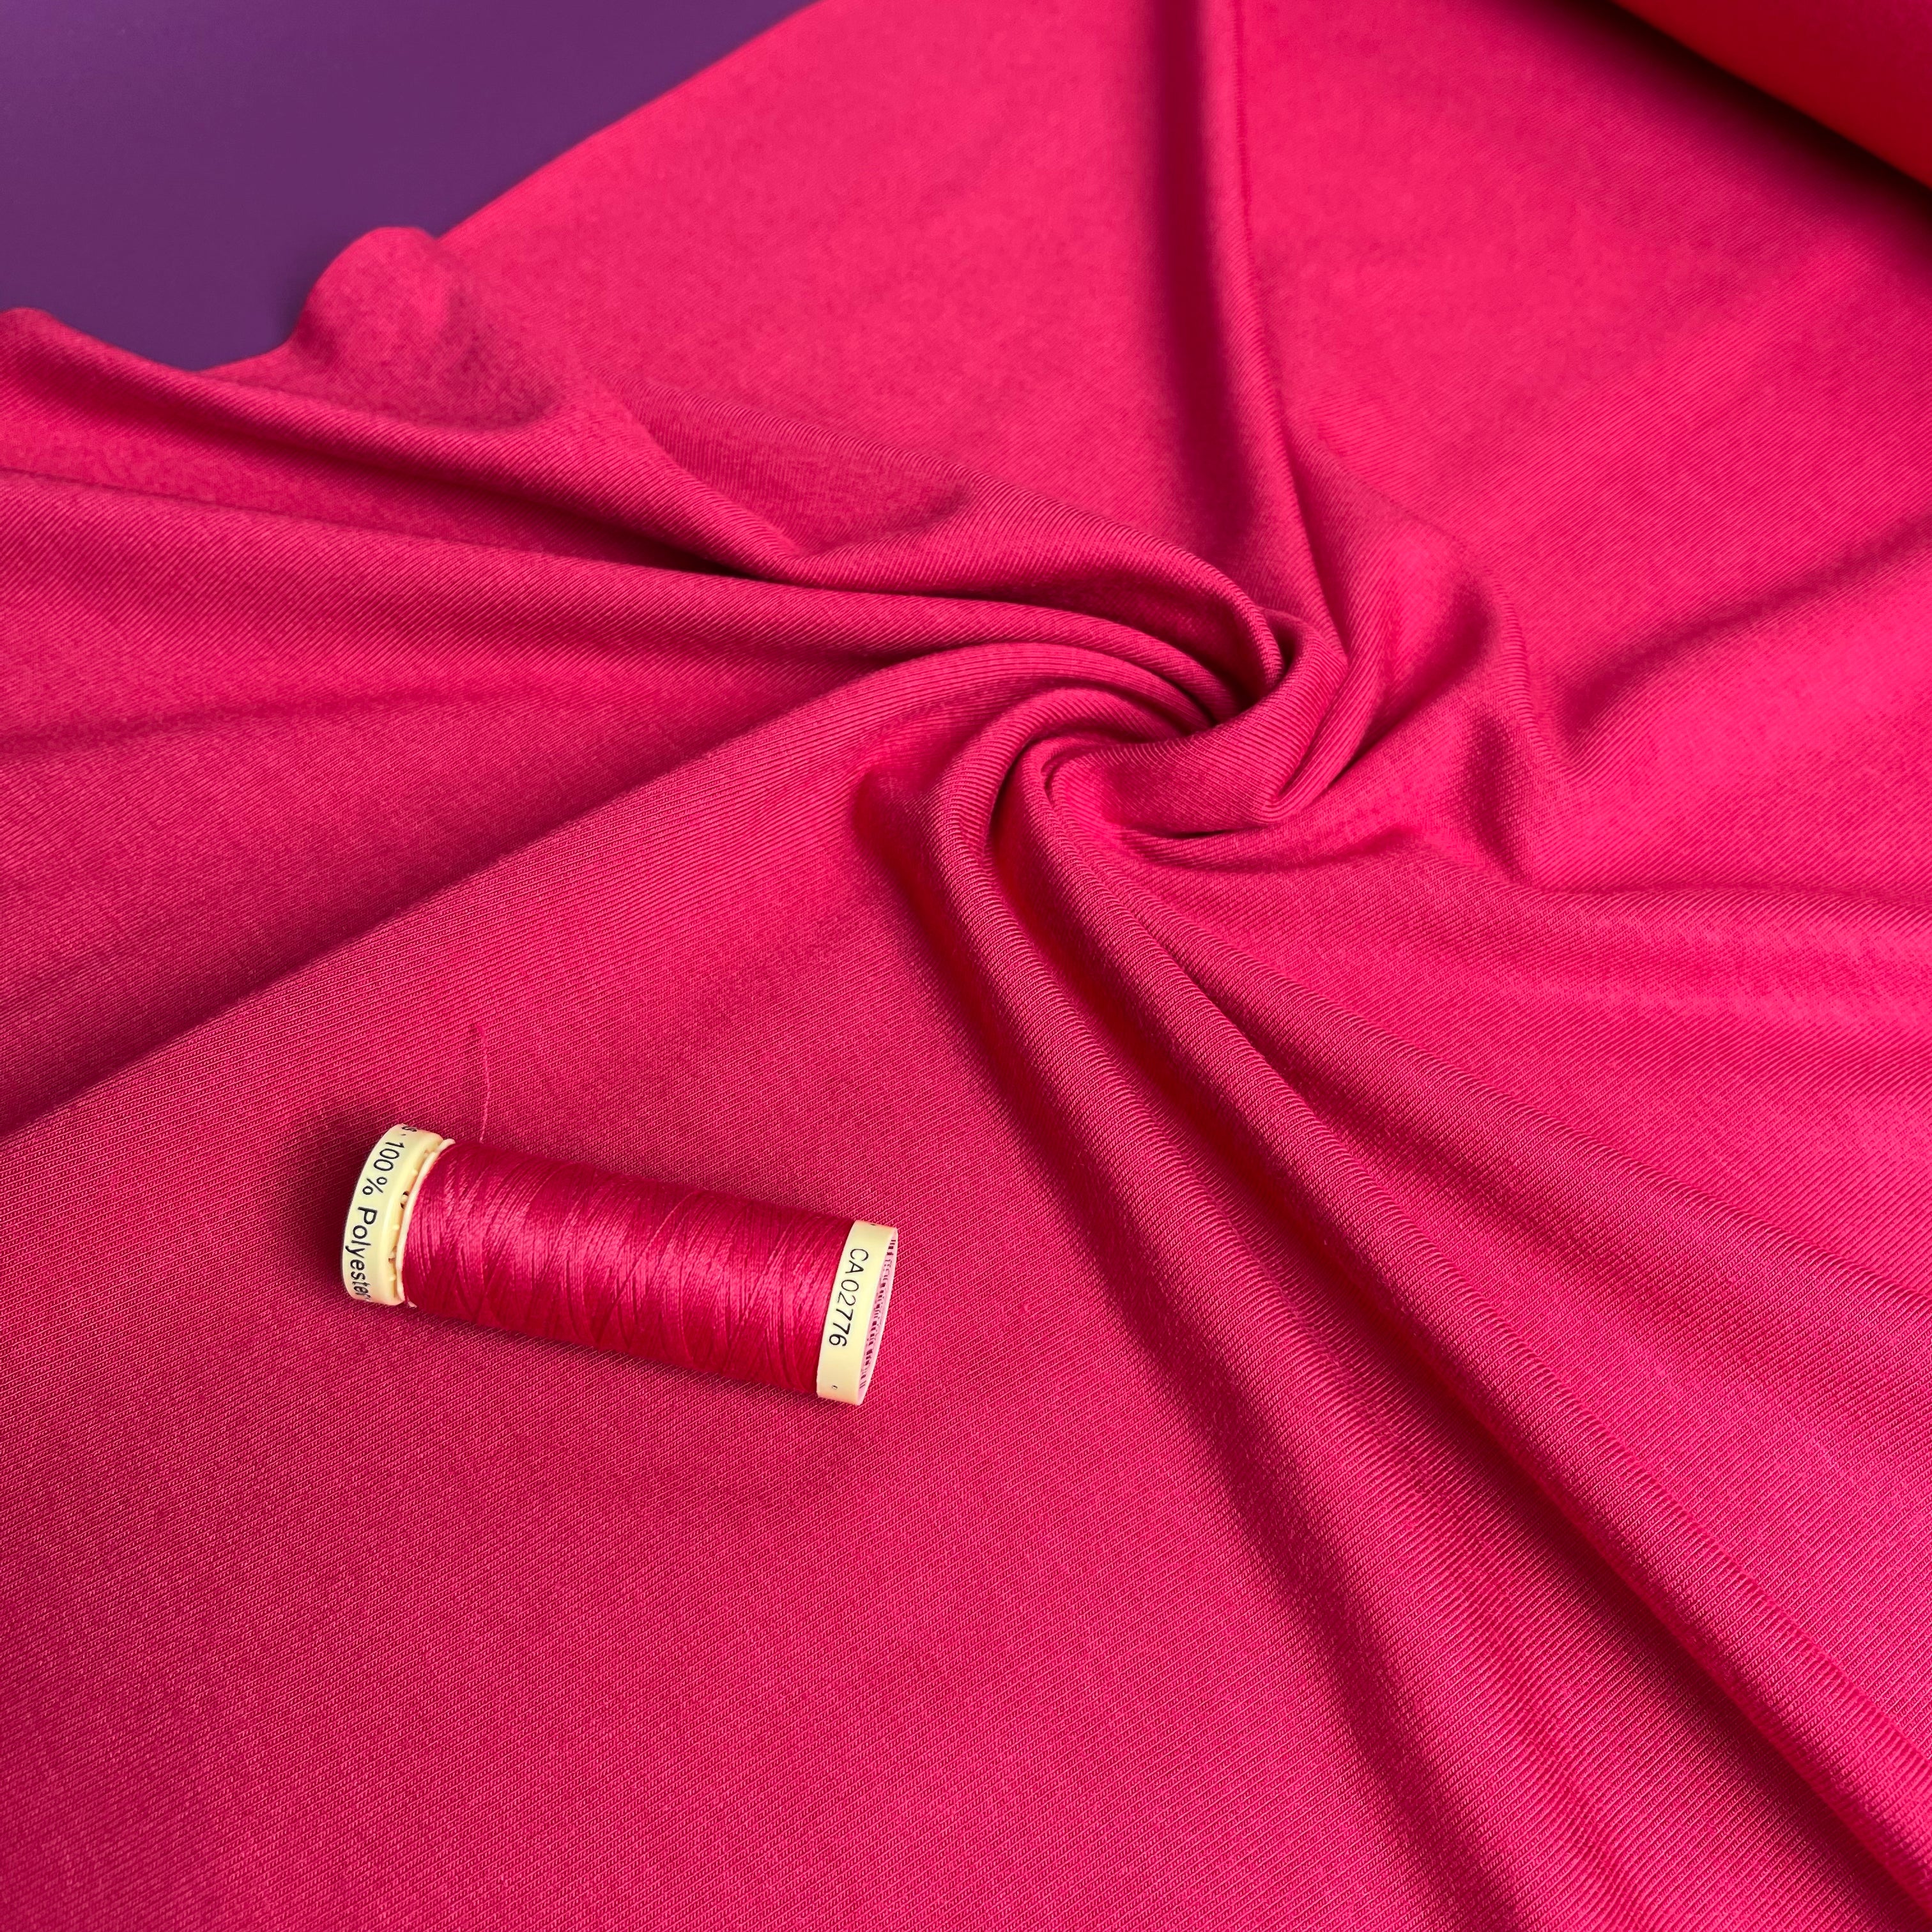 Bliss Strawberry Jersey Fabric with TENCEL™ Modal Fibres